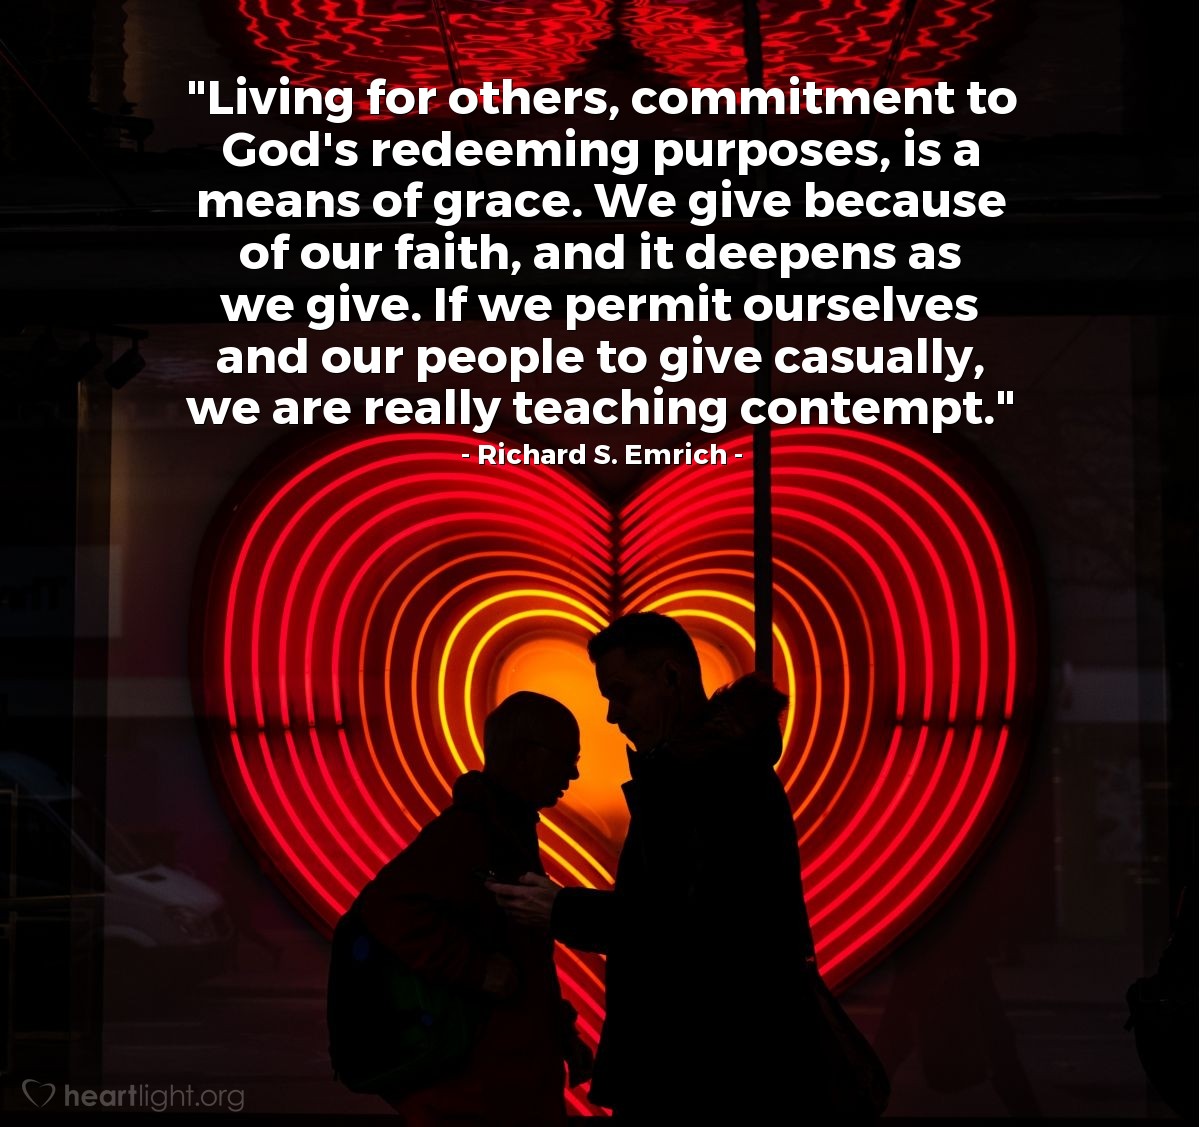 Illustration of Richard S. Emrich — "Living for others, commitment to God's redeeming purposes, is a means of grace. We give because of our faith, and it deepens as we give. If we permit ourselves and our people to give casually, we are really teaching contempt."